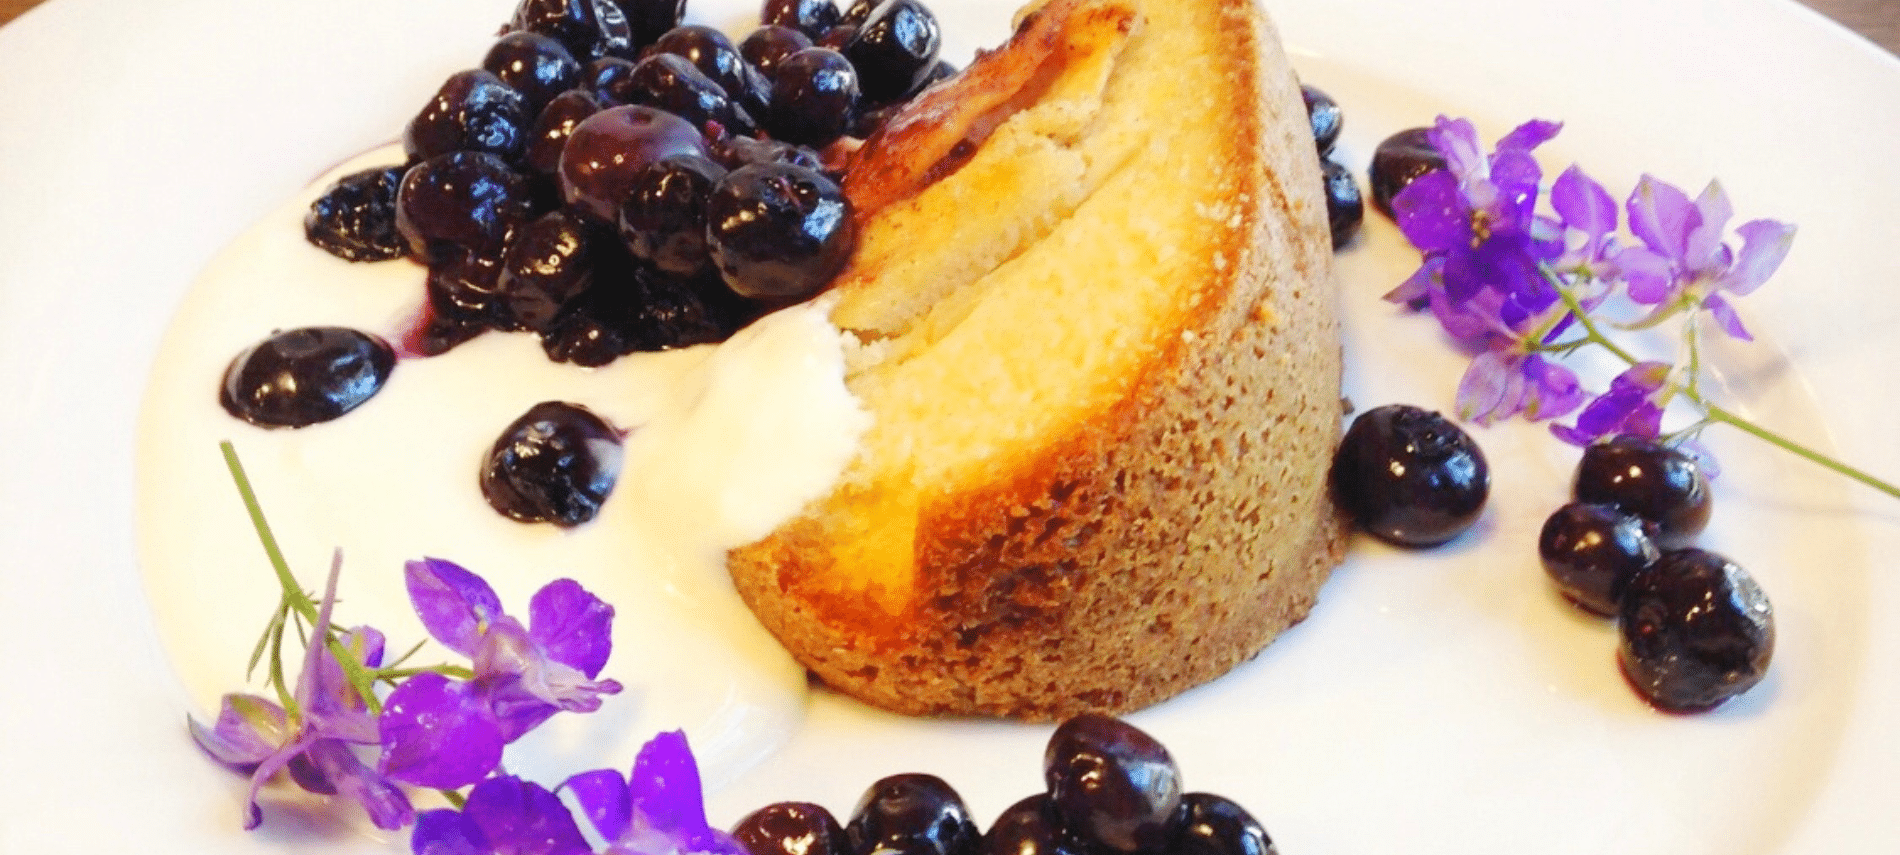 Blueberry Coffee Cake at Abigial's